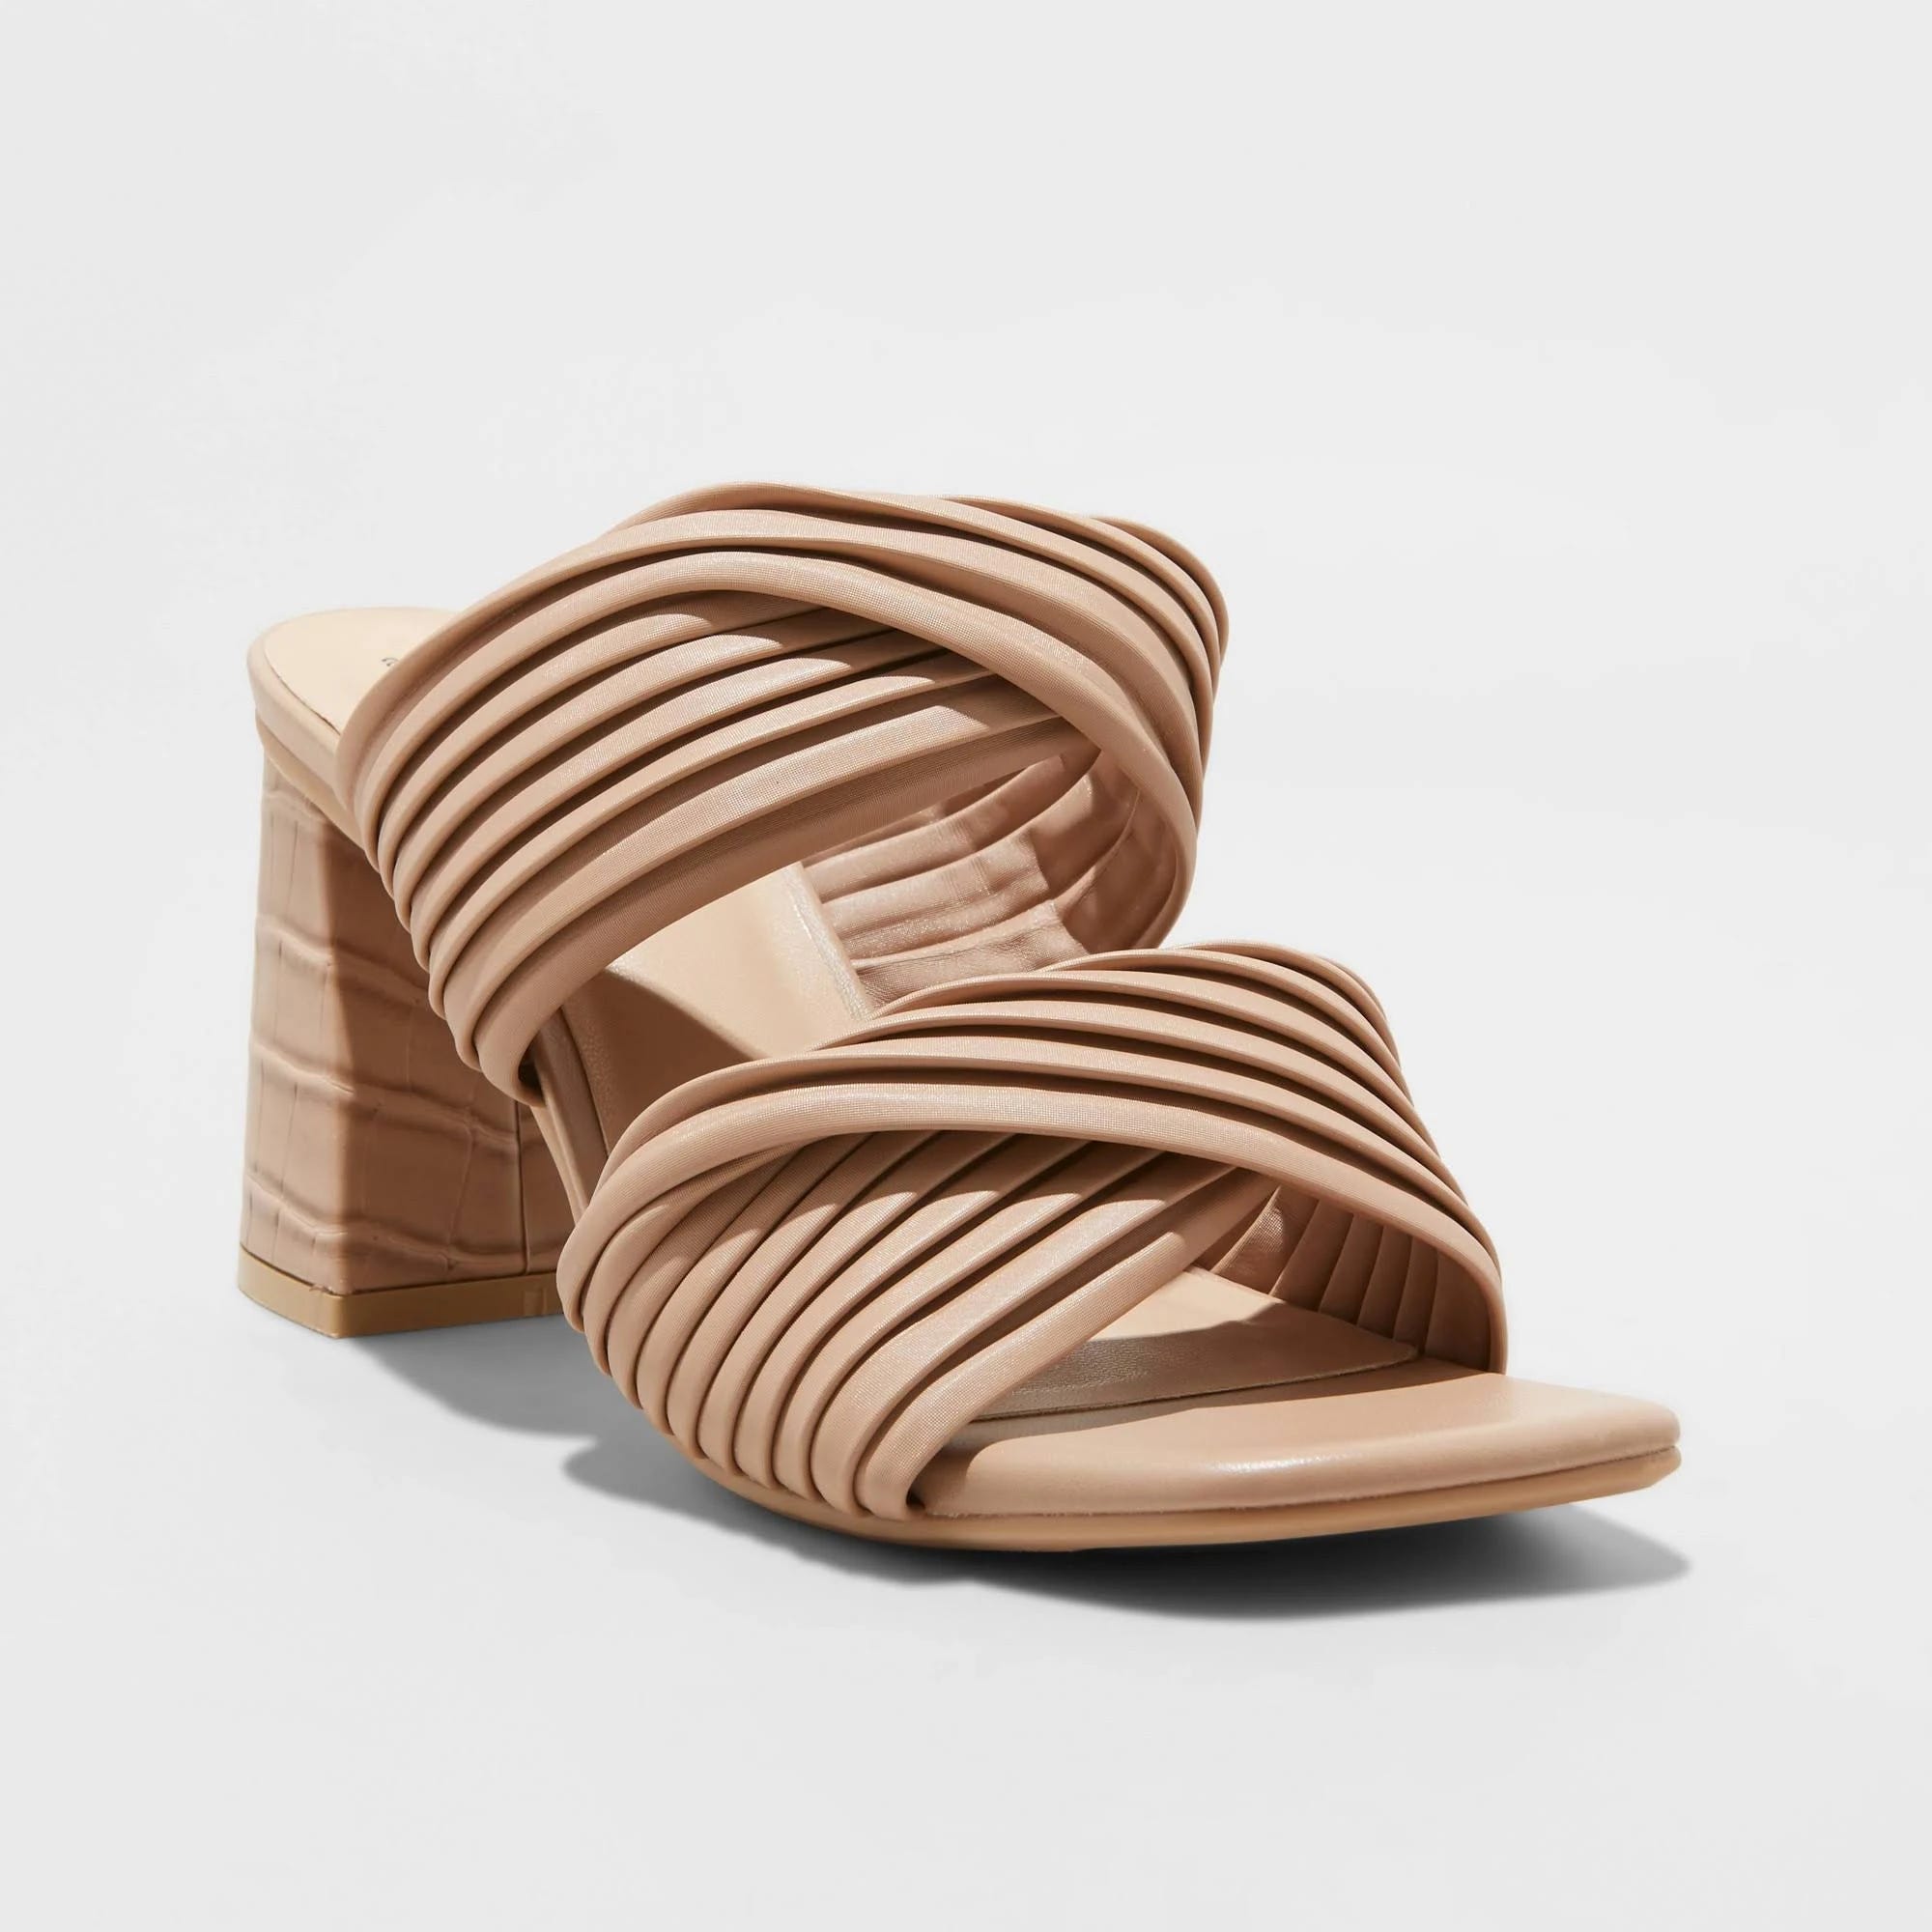 Square Toe Mule Heels: A New Day Jessa Brown Mules for Added Style & Comfort | Image